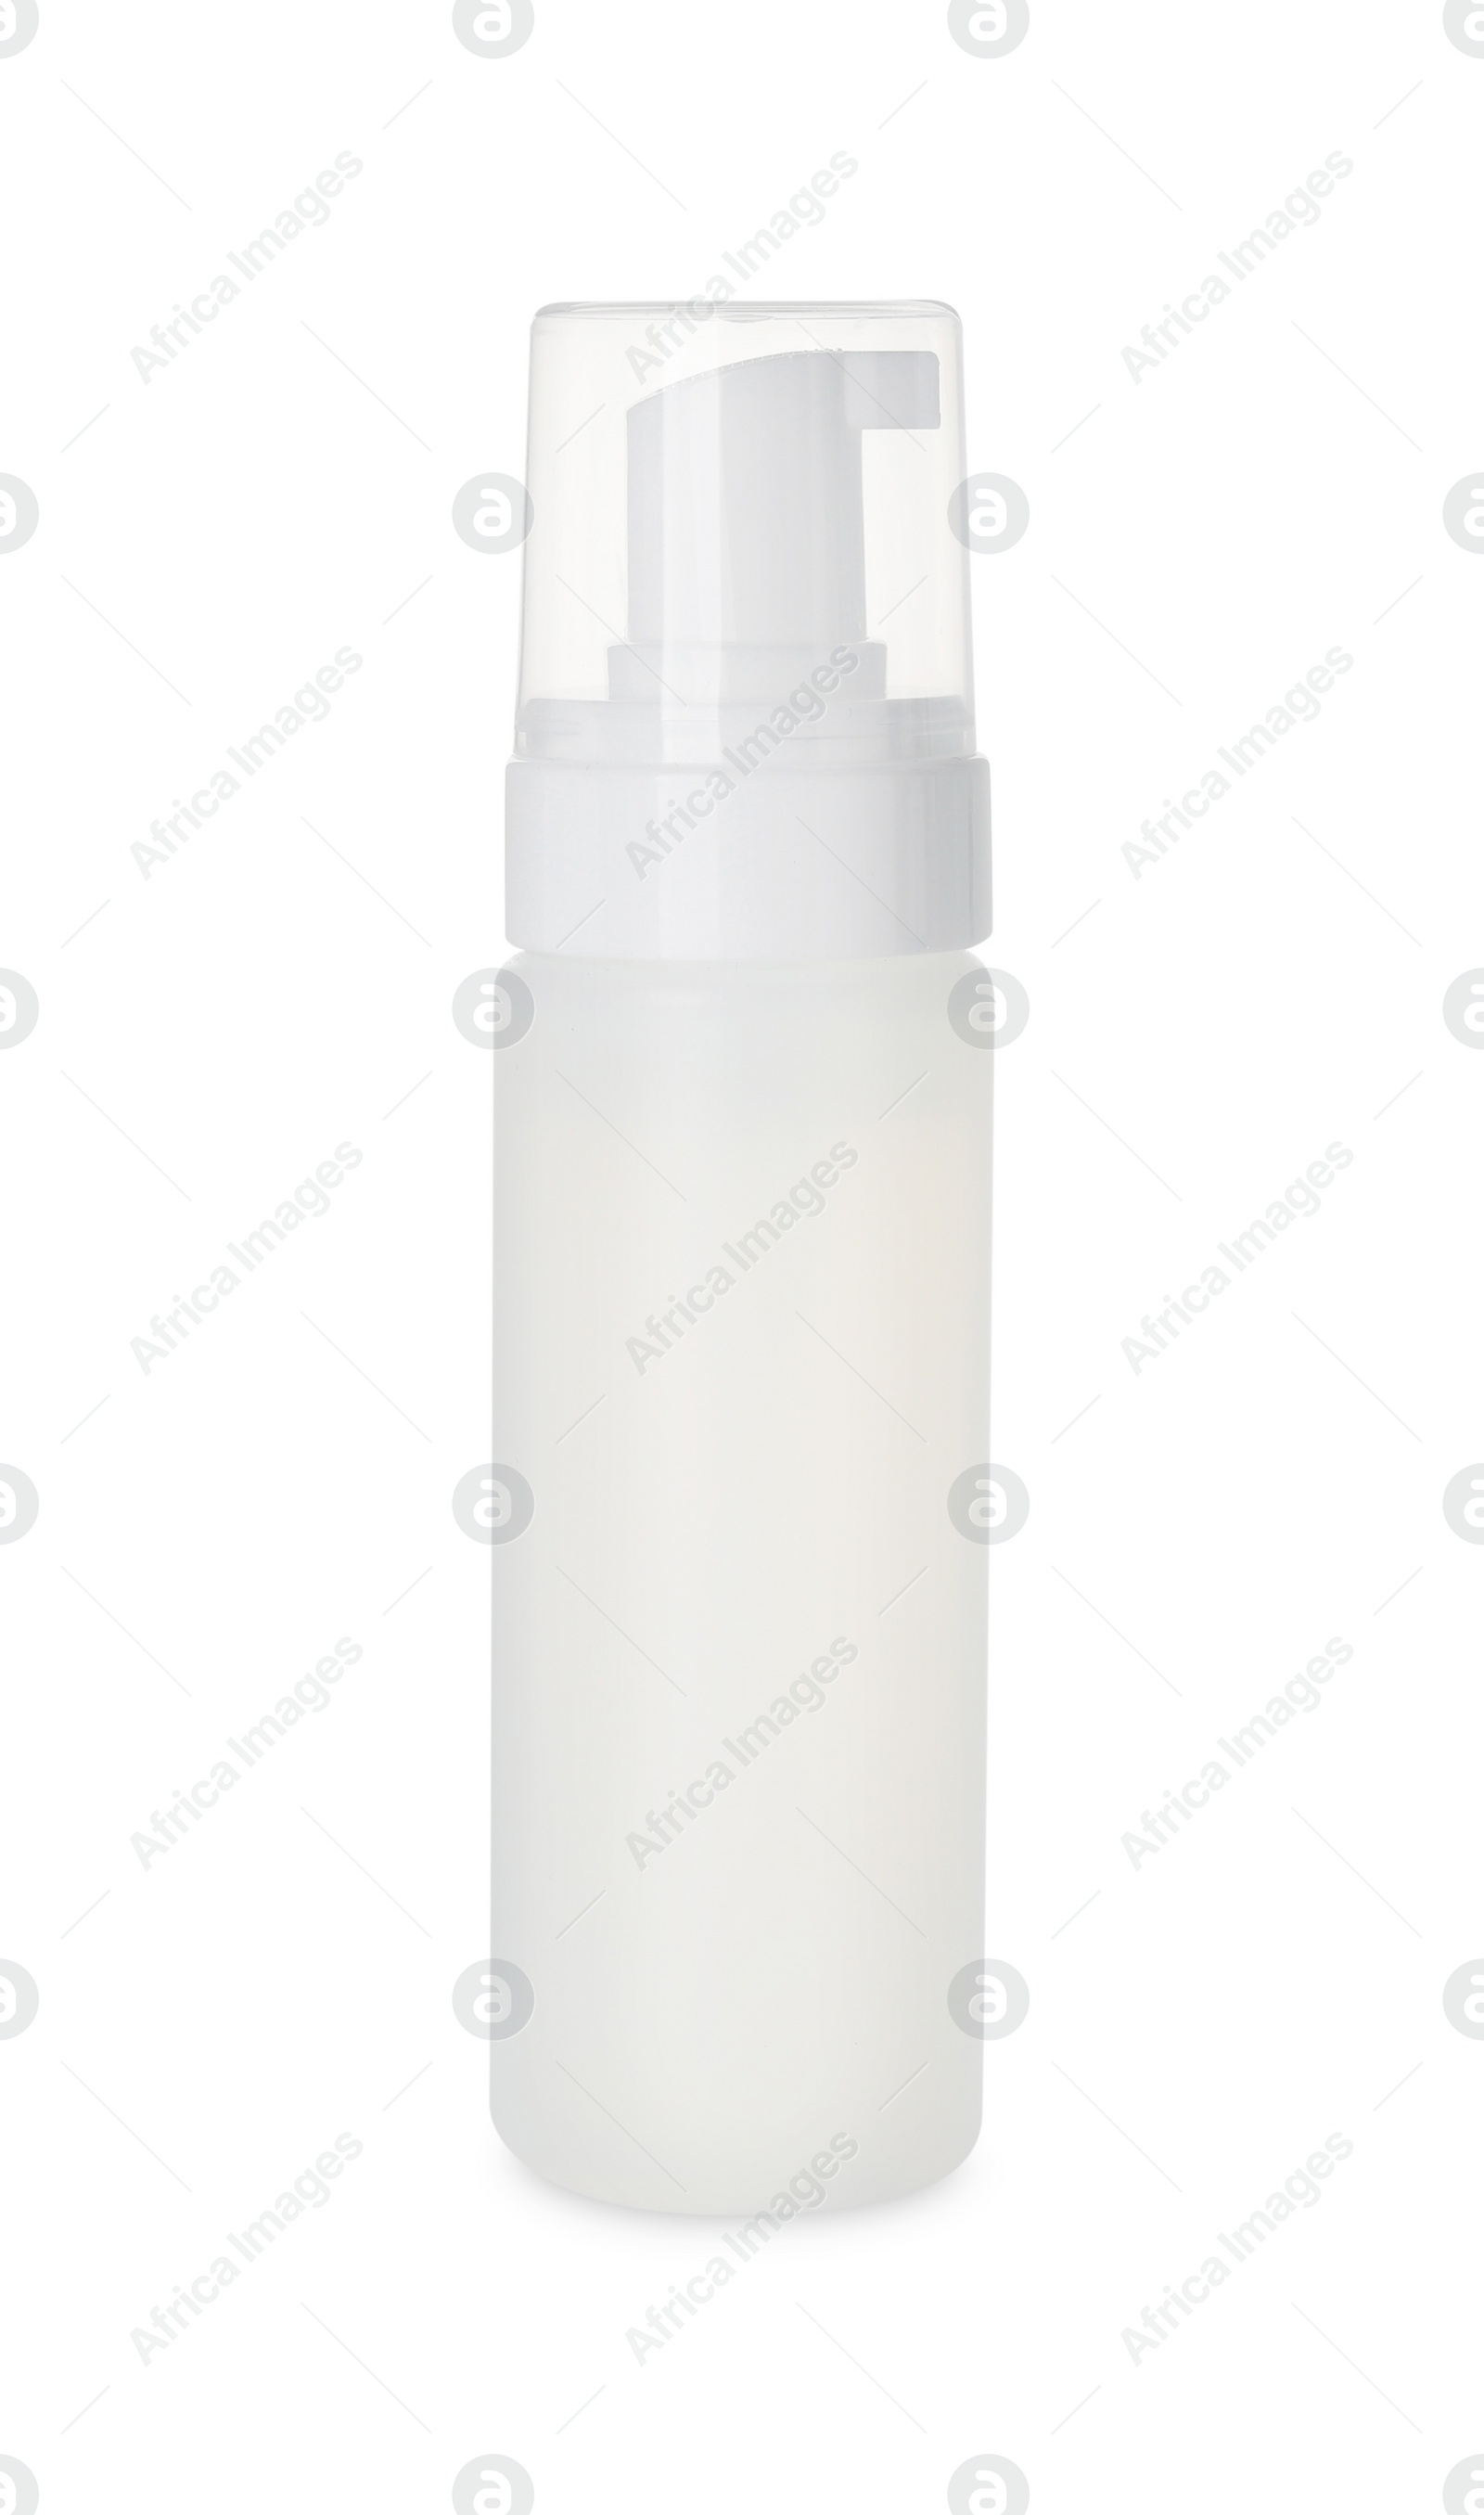 Photo of Bottle of face cleansing product isolated on white